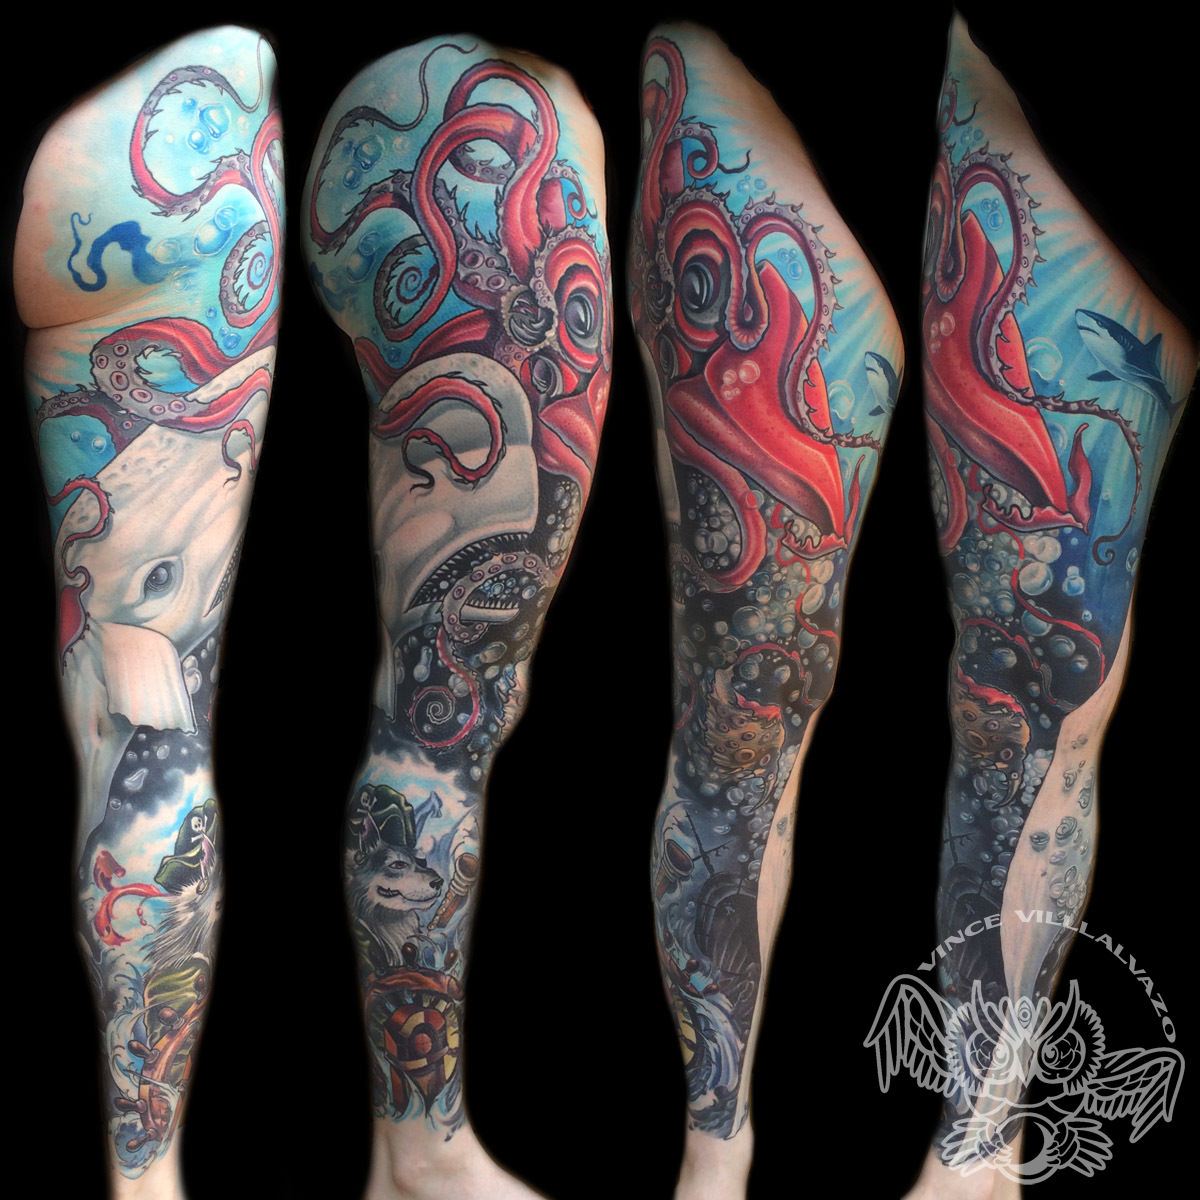 Jeff Norton Tattoos : Tattoos : Body Part Leg : Finished work, squid and  floral leg sleeve